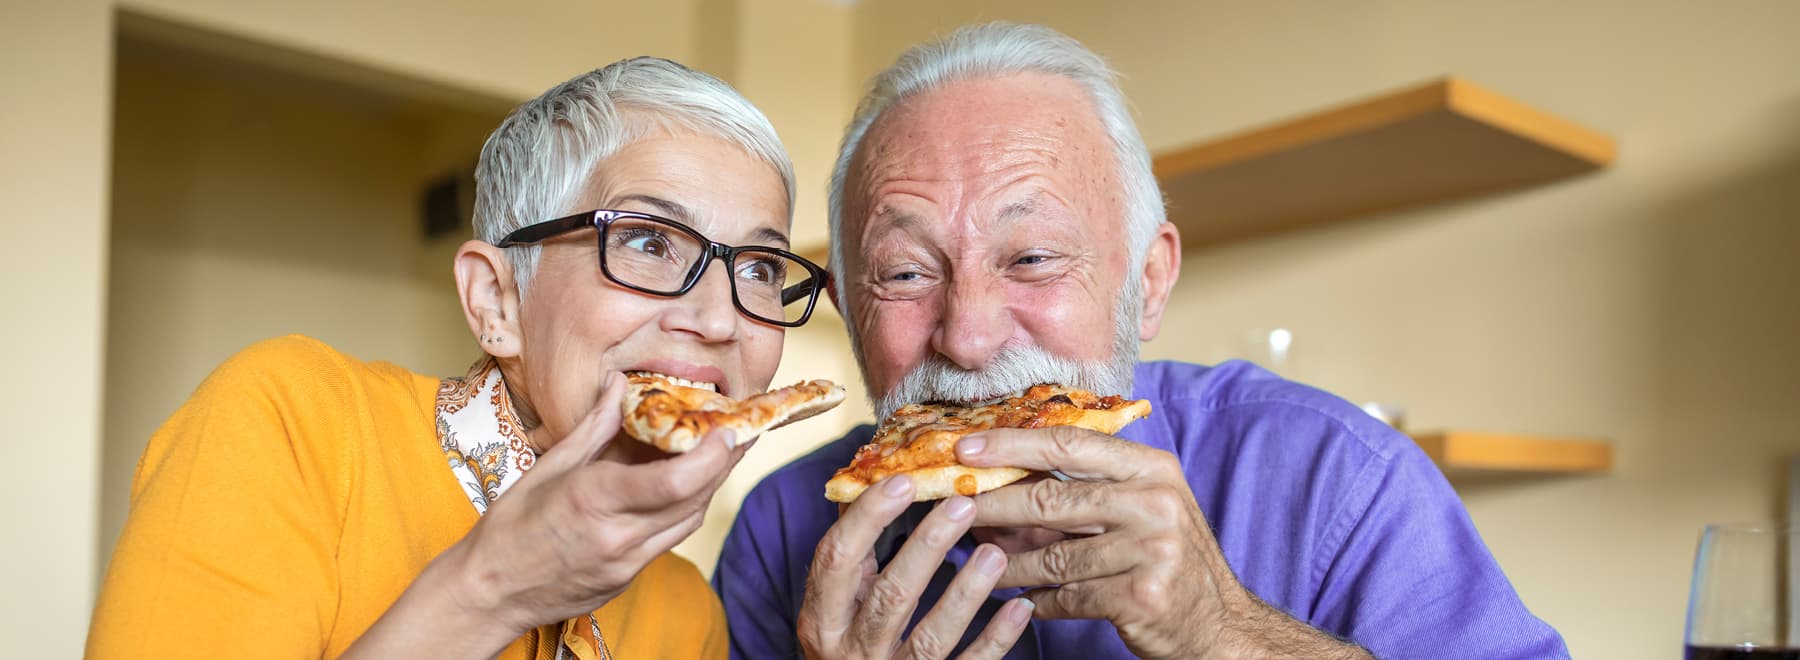 A couple enjoys slices of pizza